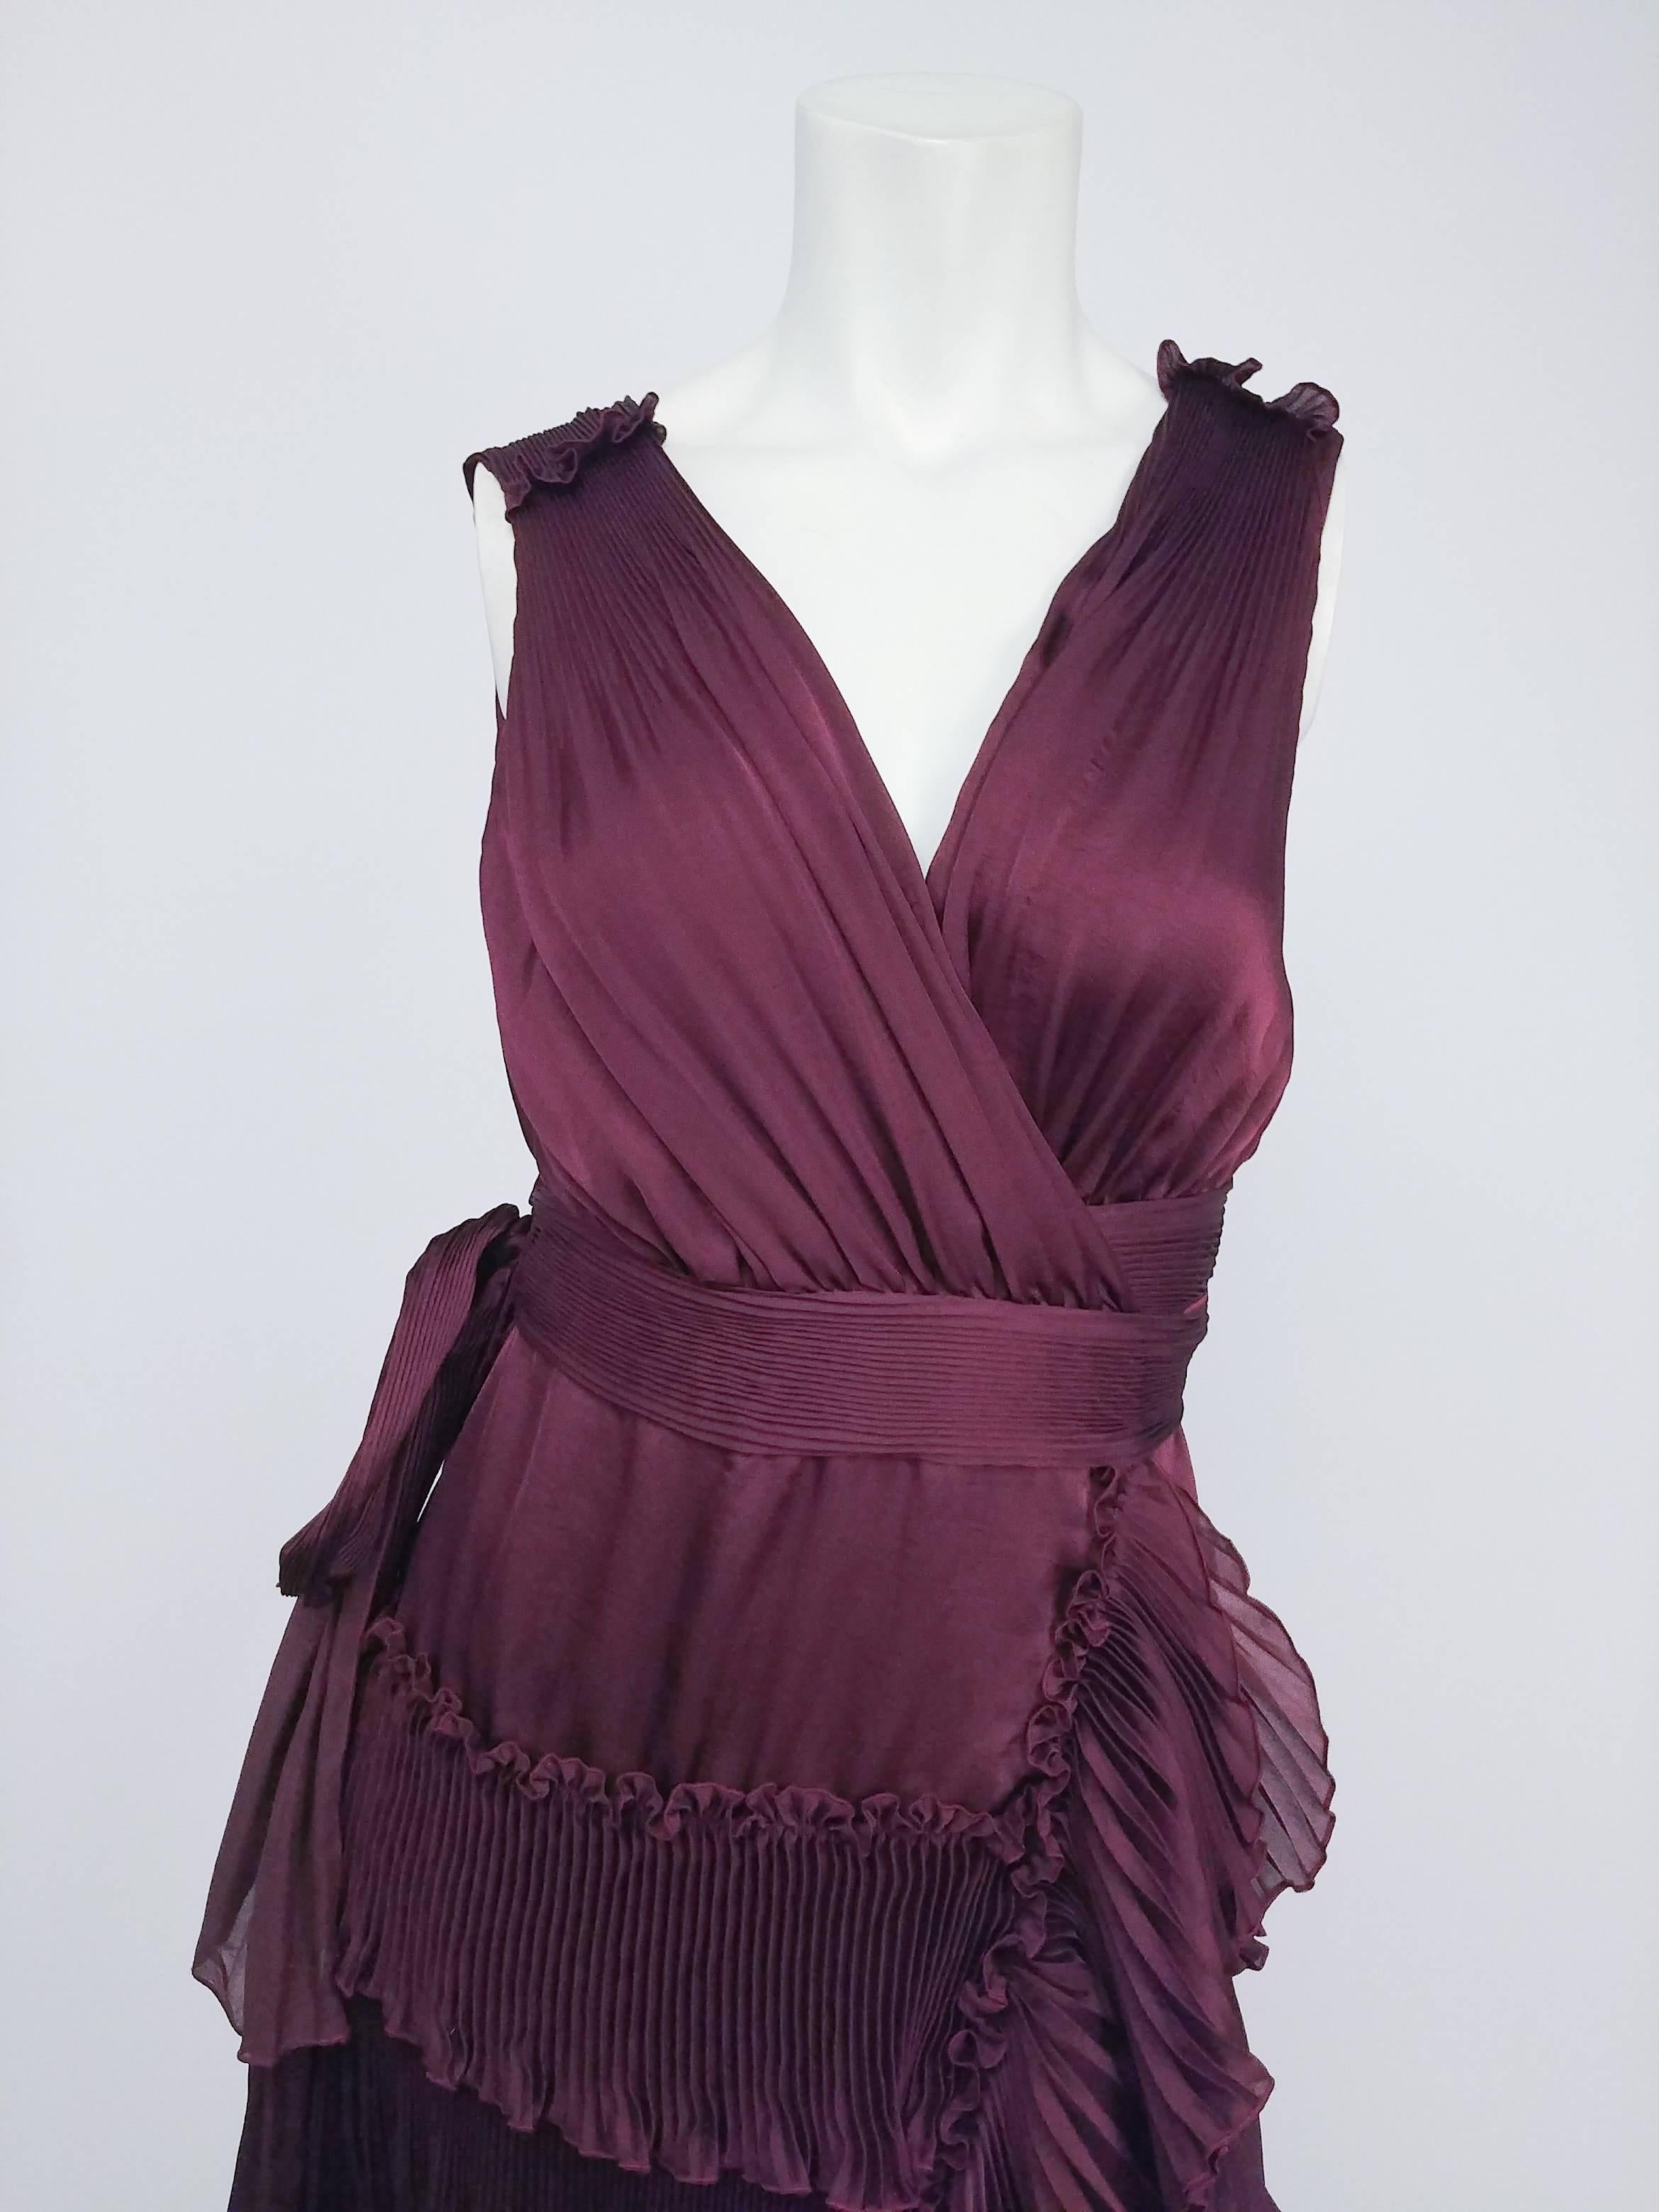 Diane von Furstenberg Purple Pleated Ruffle Wrap Dress. Classic Diane von Furstenberg wrap dress, this eggplant purple cocktail number boasts rows of set pleated ruffles for an ethereal, floating effect. The waist ties feed through the side seam to